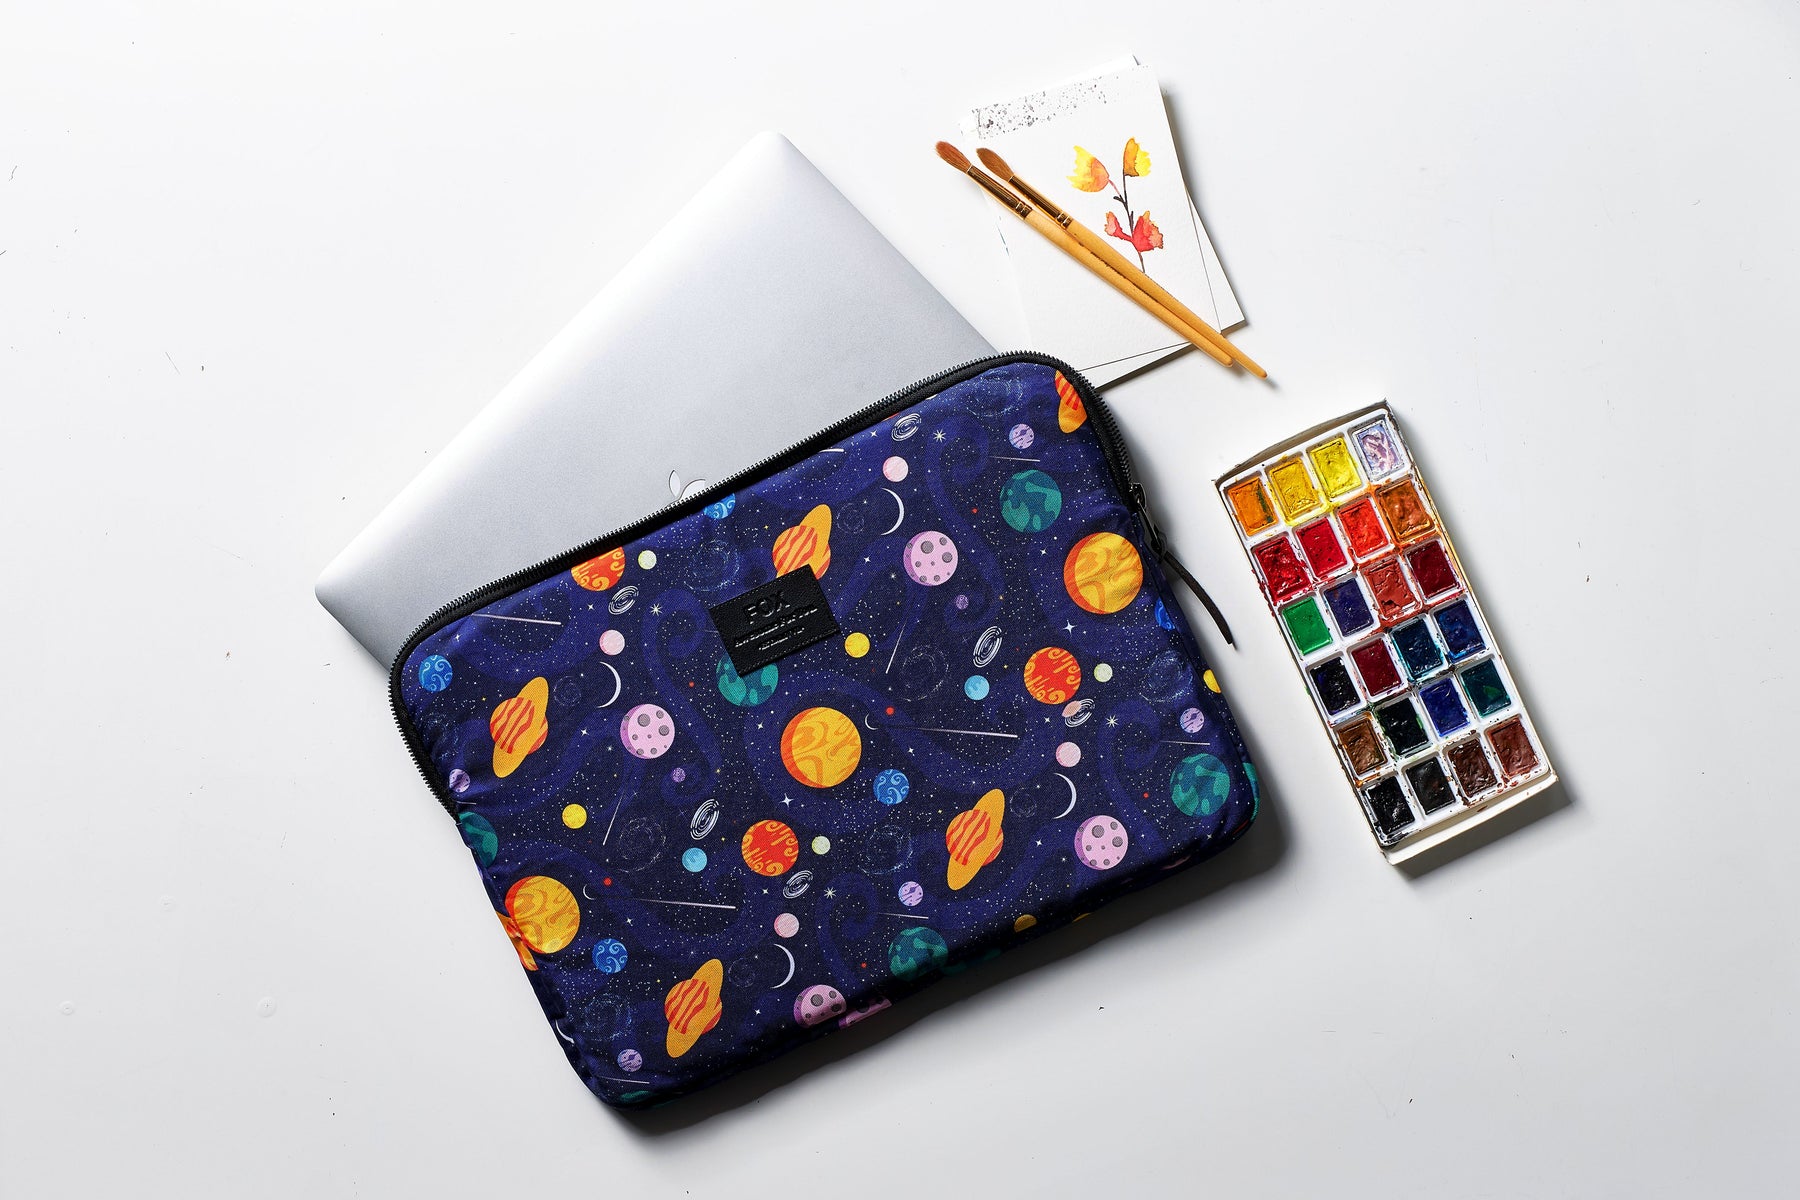 Planets Laptop Sleeve